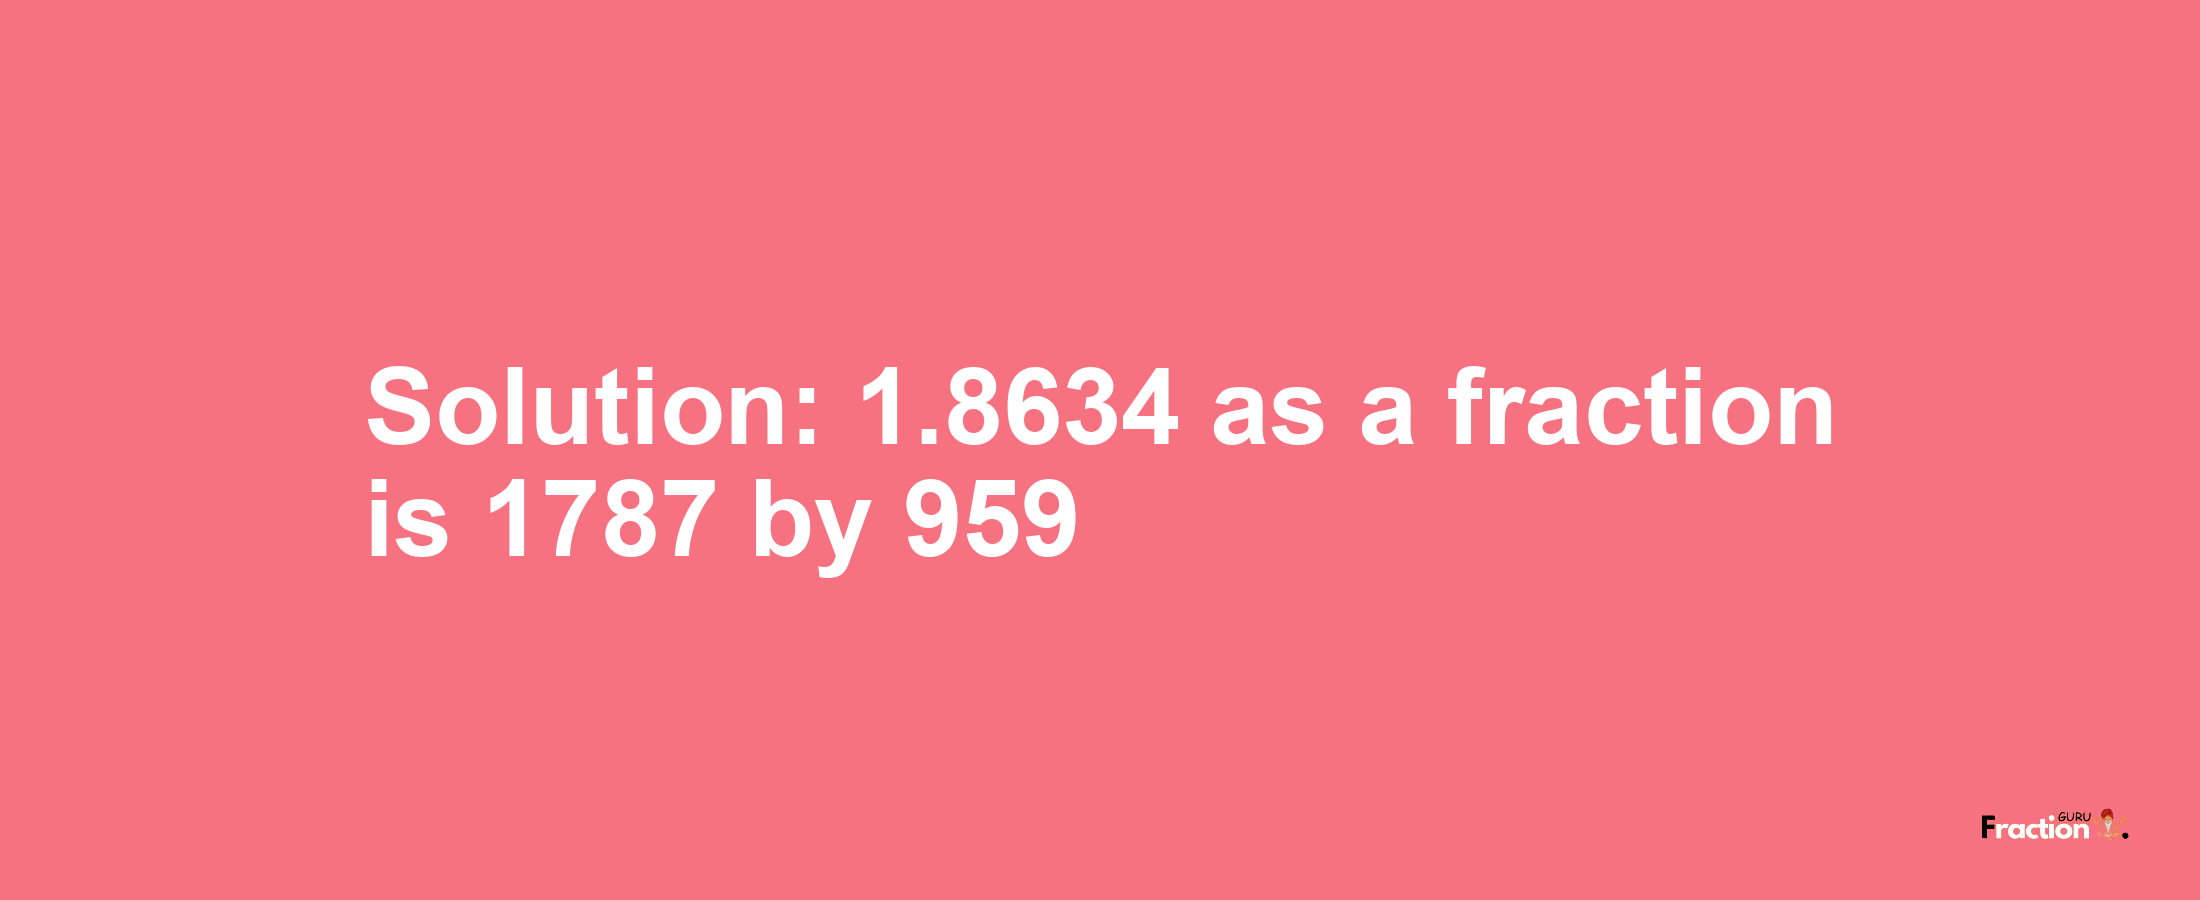 Solution:1.8634 as a fraction is 1787/959